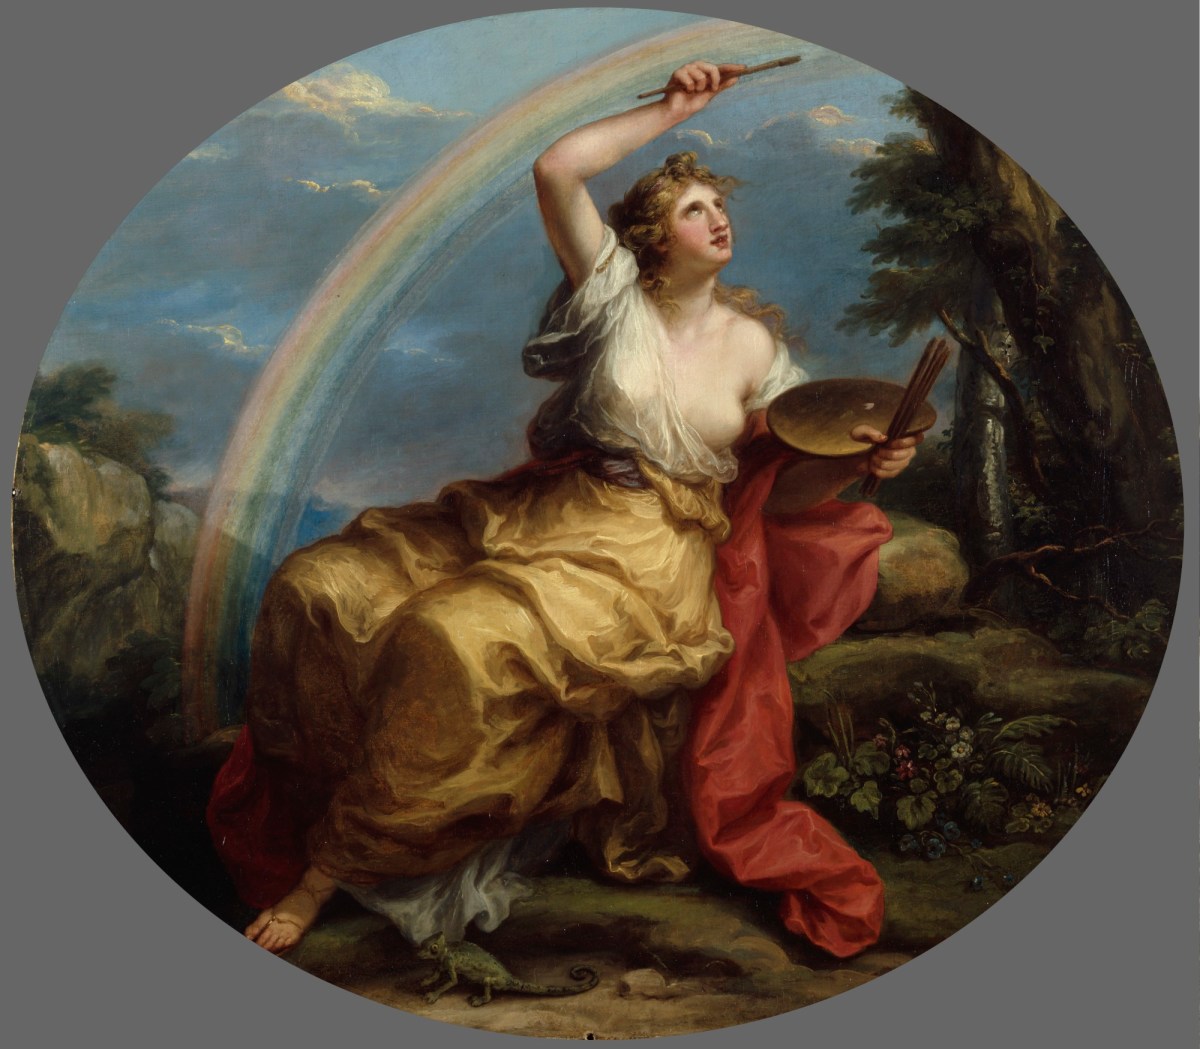 It's #AngelicaKauffmann's birthday. She painted a series called The Elements of Art, including Invention, Design, Composition, and, below, Color. The artist simply harvests what she needs from a convenient rainbow! Born #OTD in 1741.